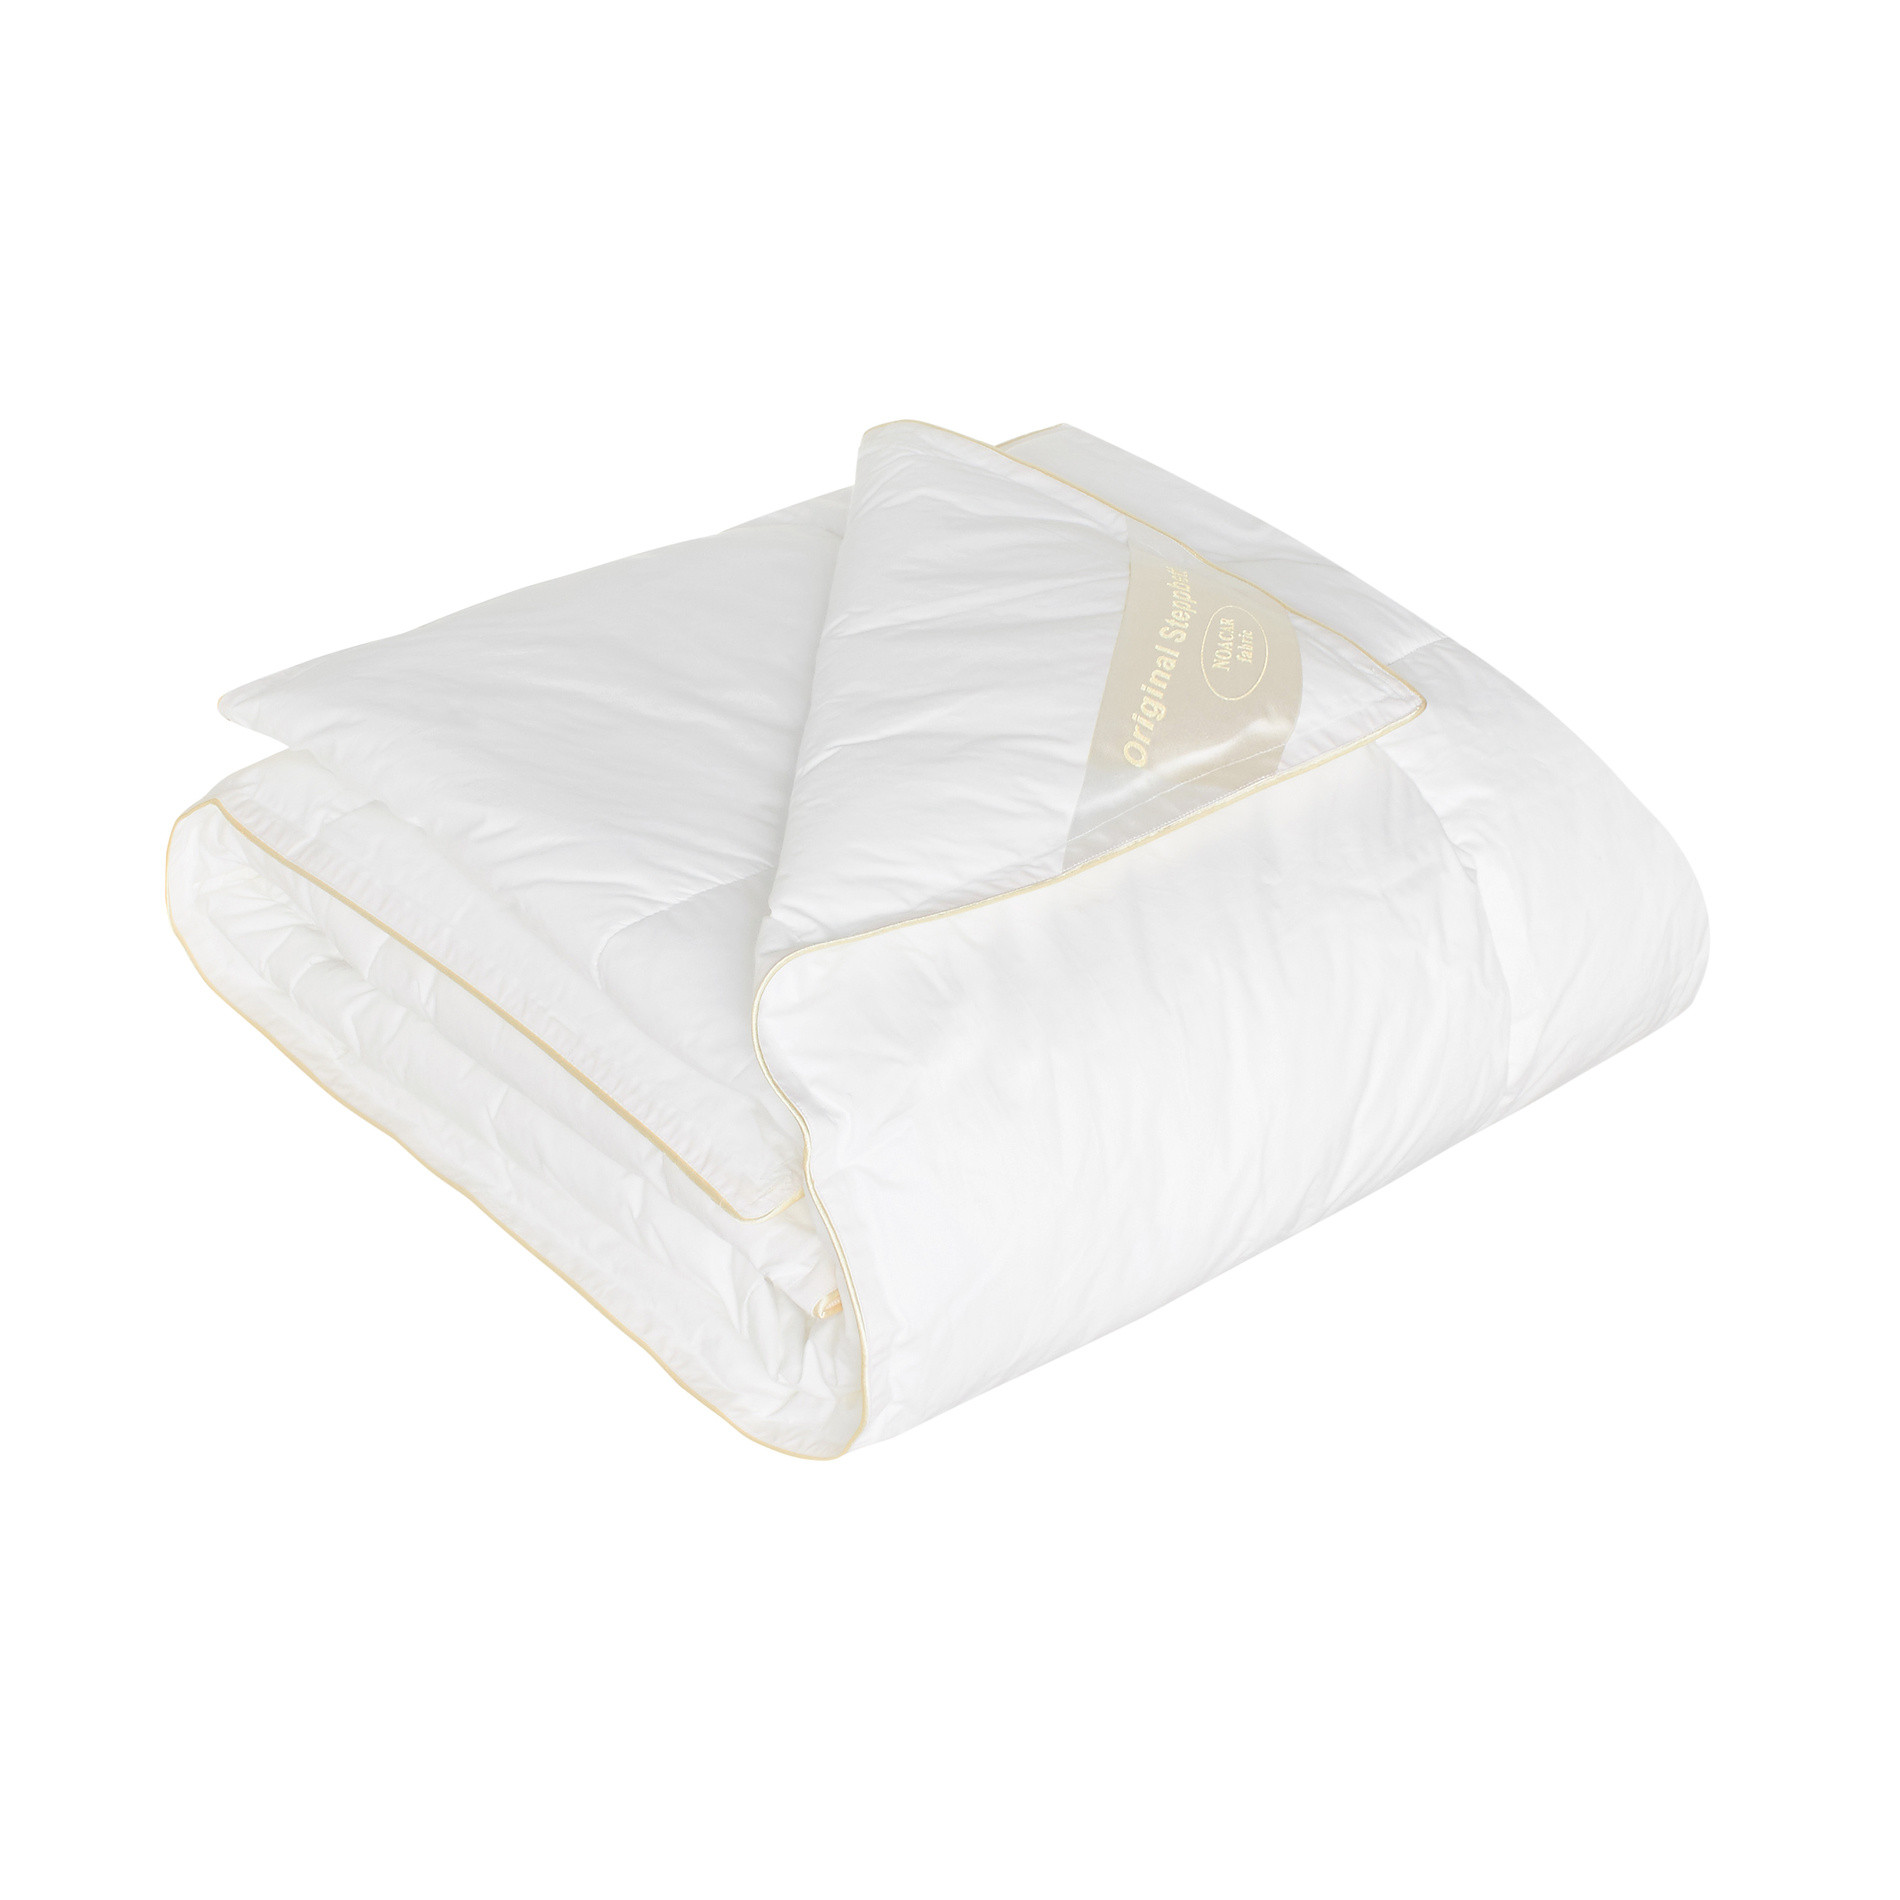 Duvet with microsphere padding, White, large image number 0